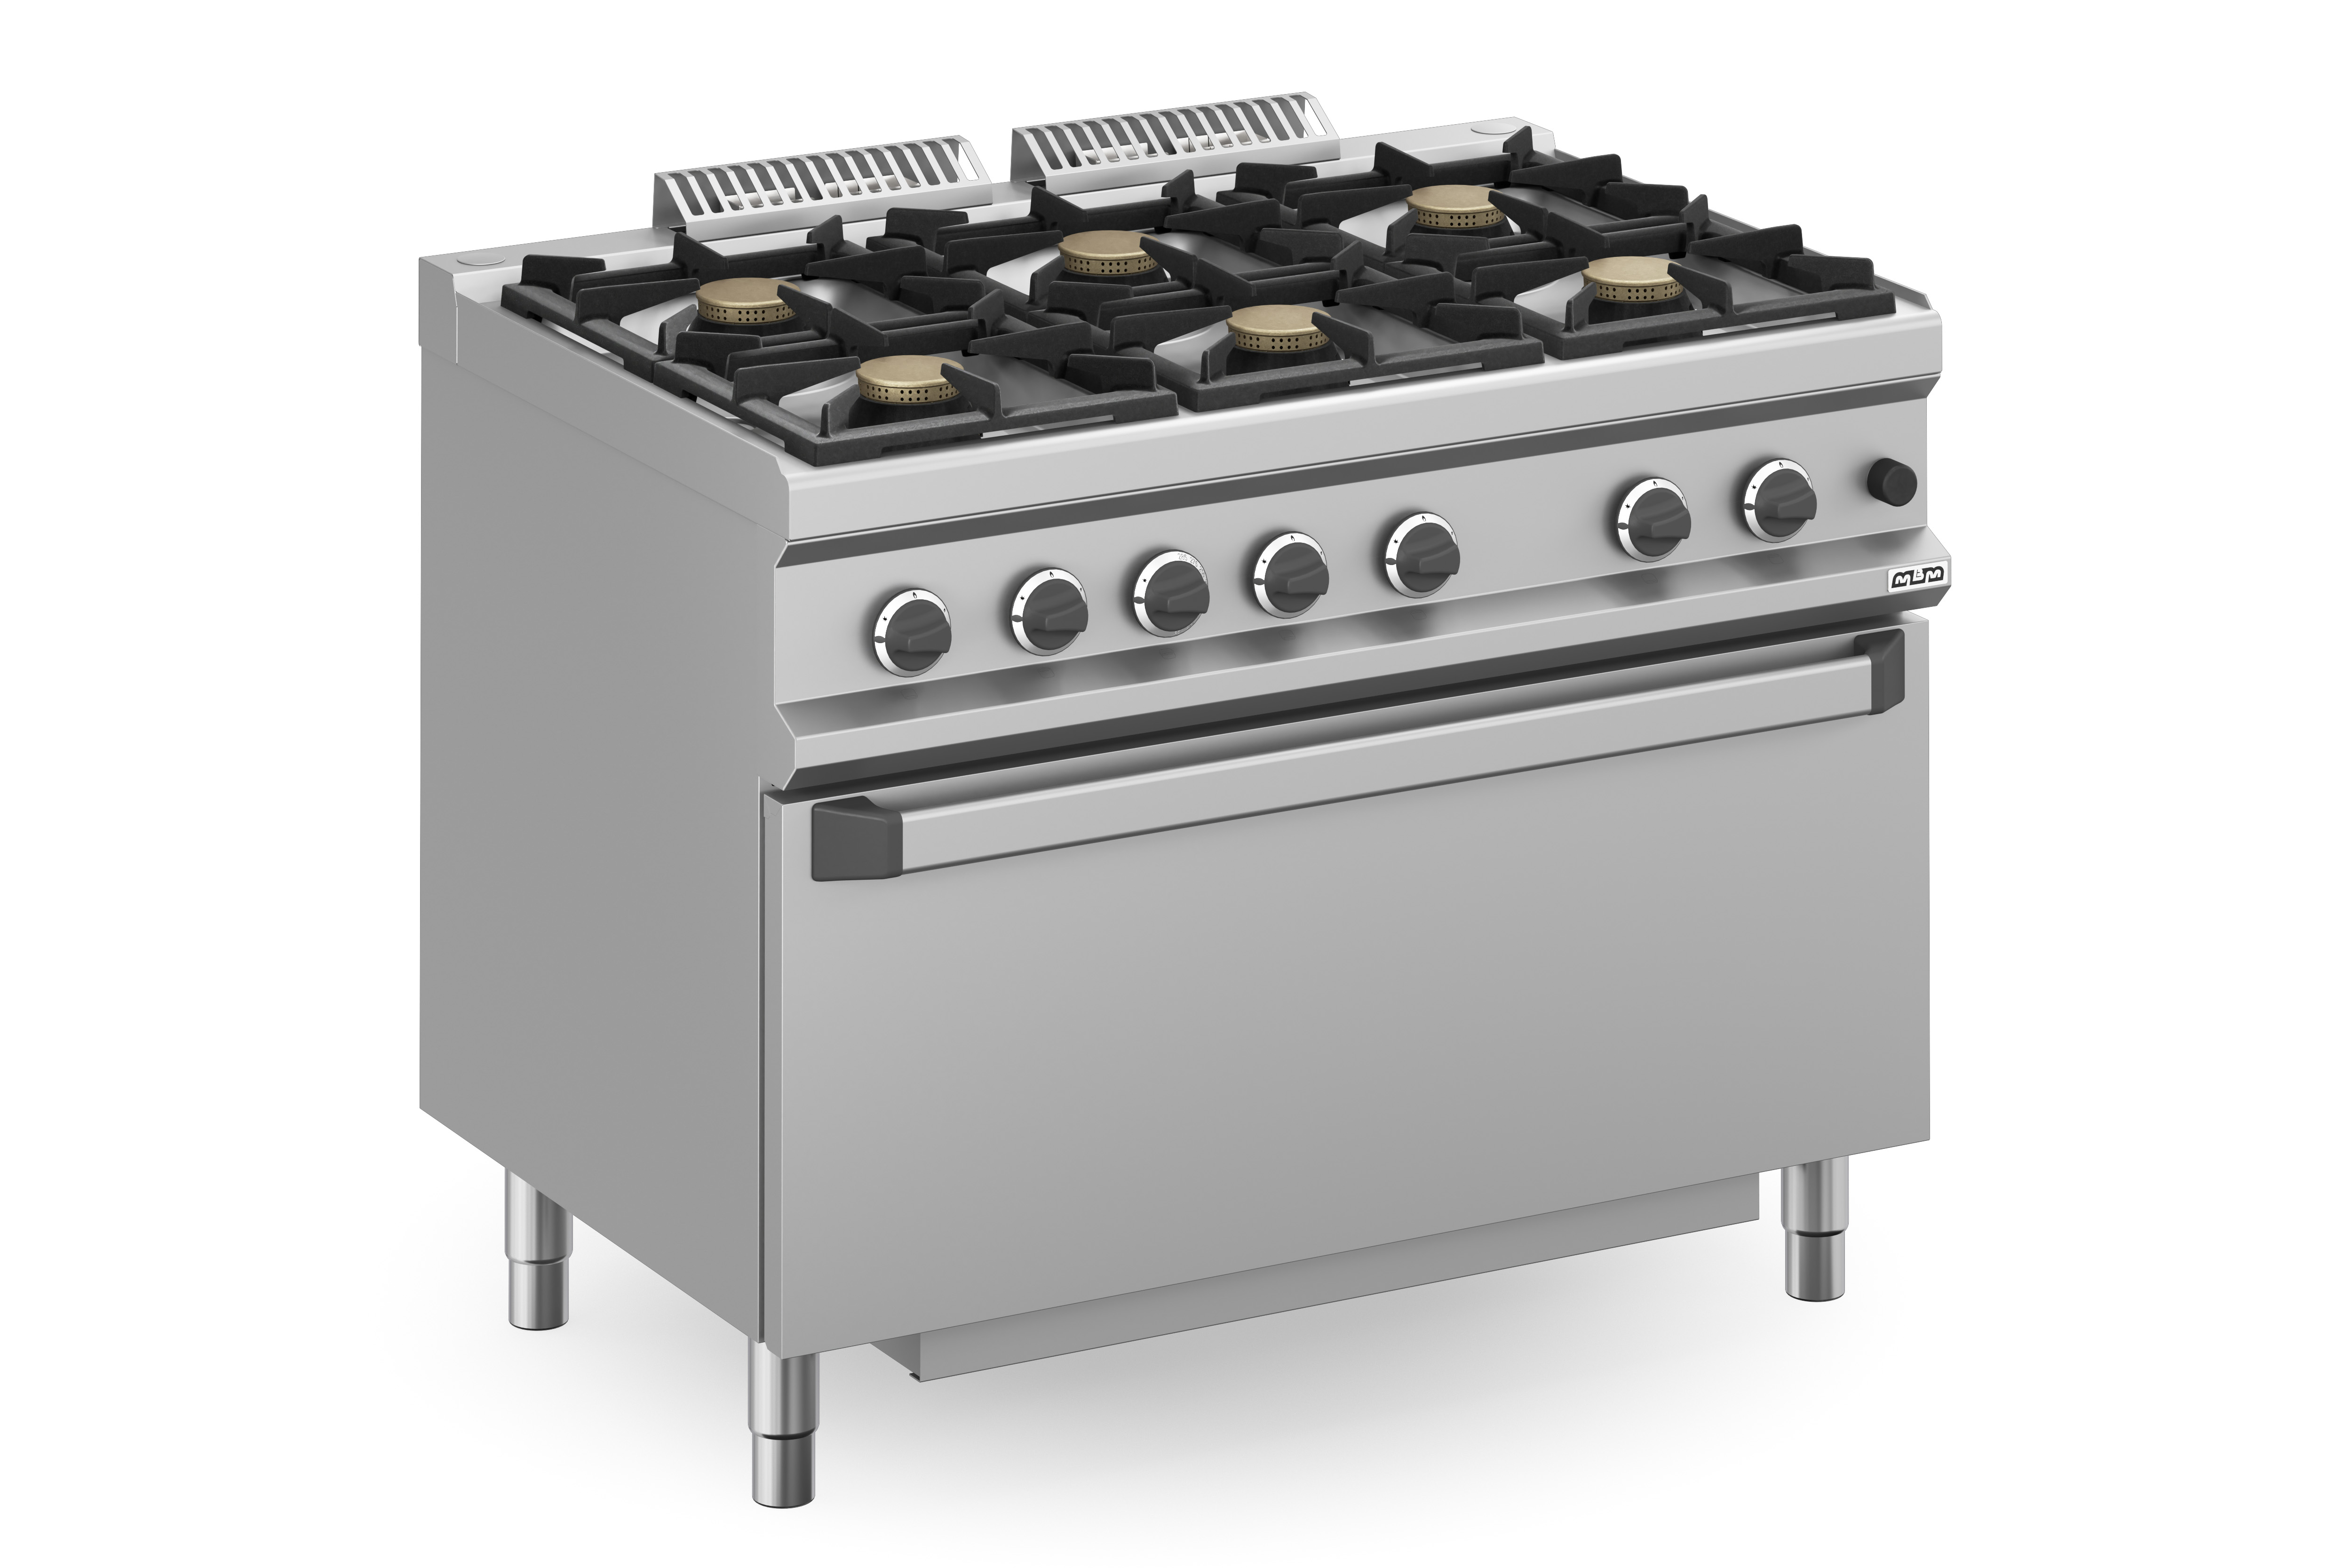 Magistra MFB711FGMXS 6 Burners Gas Cooker with Maxi Gas Oven